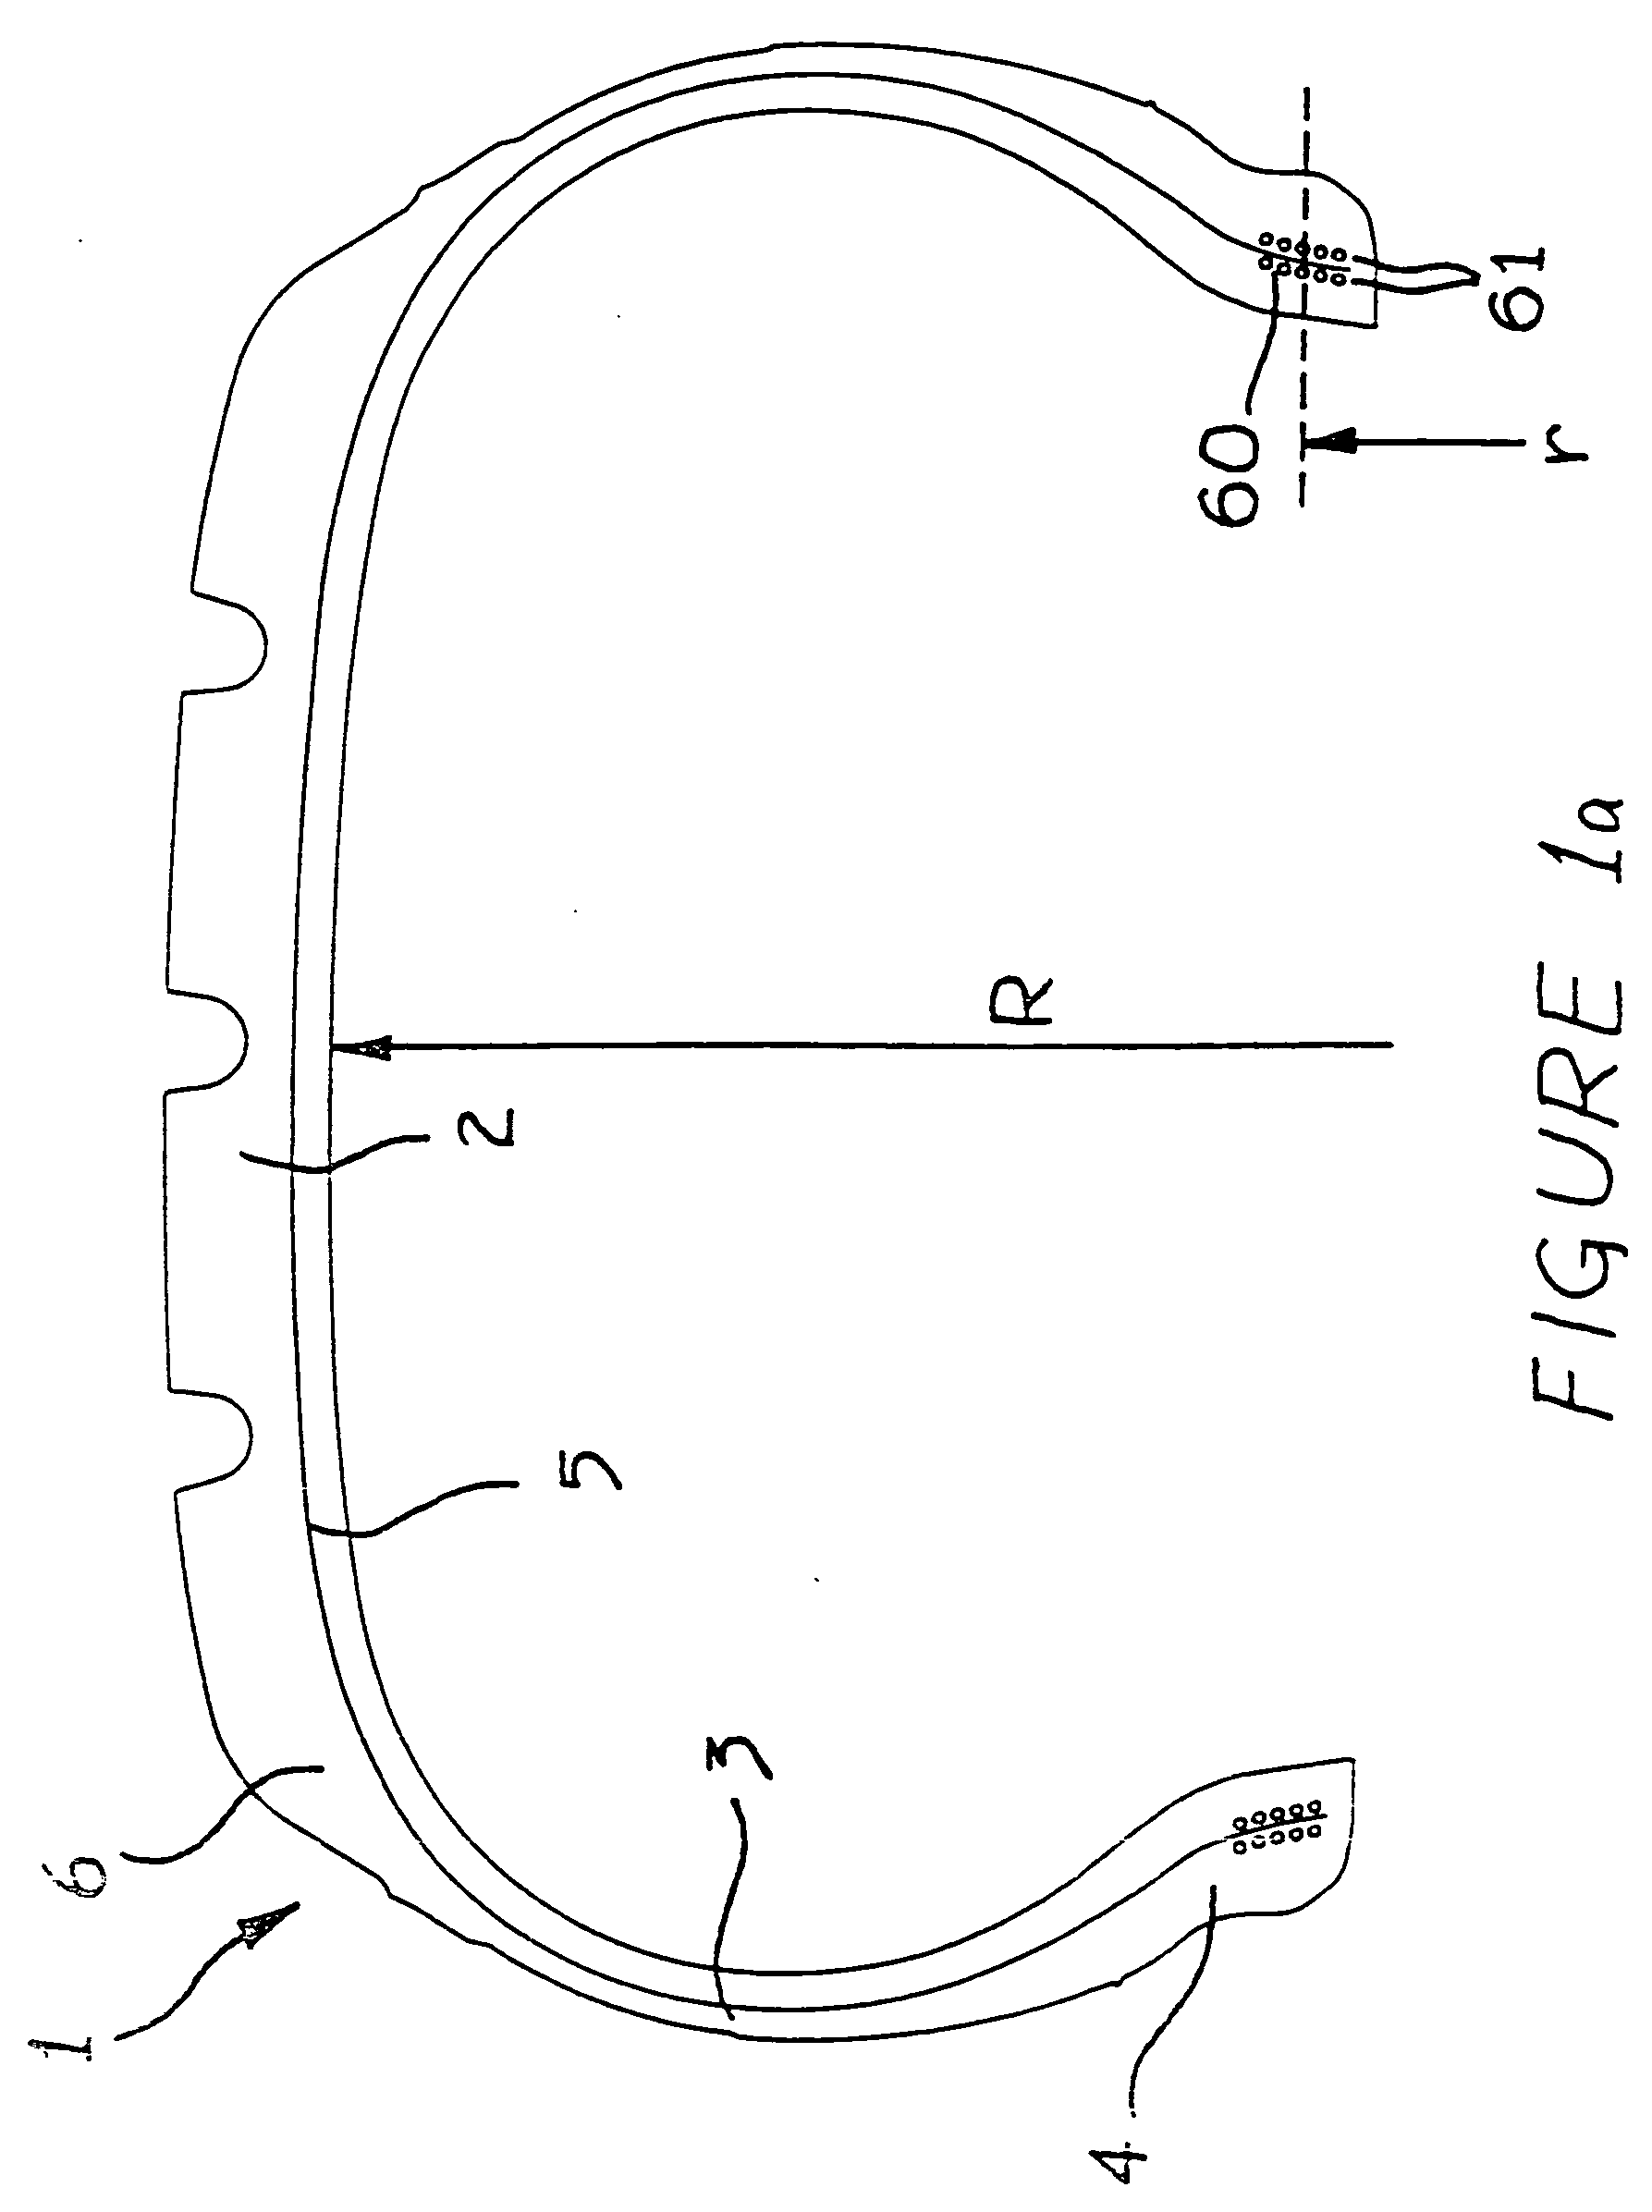 Tire with reinforcement structure forming internal and external loops